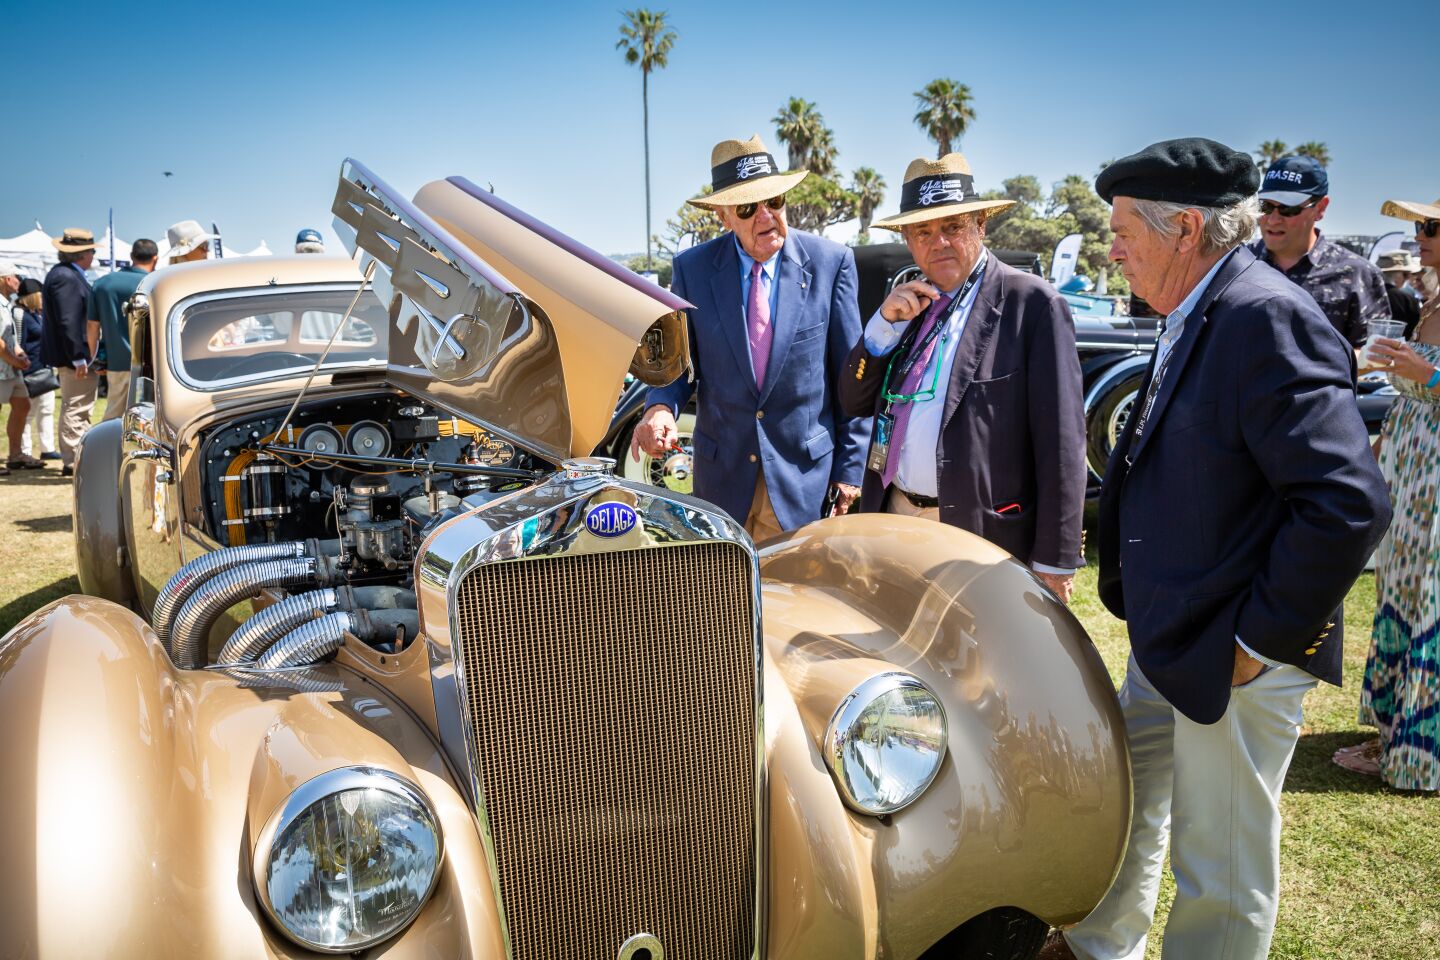 Judges Hugo Modderman and Dan Harmer talk with Dana Williamson as they peruse a 1937 Delage D8-120 Aerosport coupe from the Petersen Automotive Museum in Los Angeles.